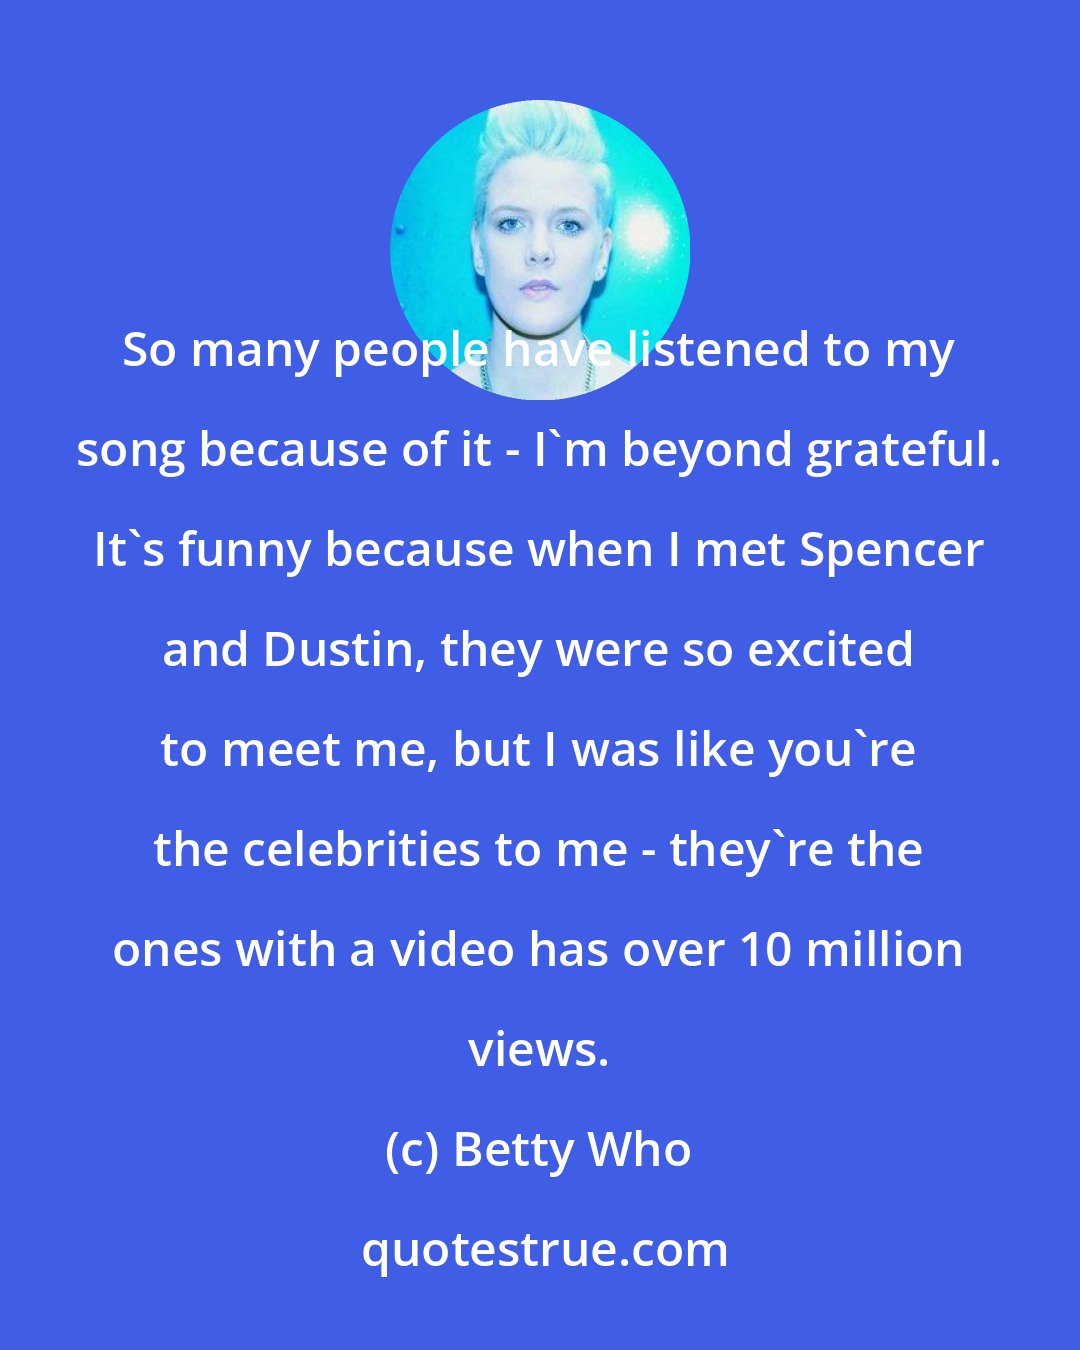 Betty Who: So many people have listened to my song because of it - I'm beyond grateful. It's funny because when I met Spencer and Dustin, they were so excited to meet me, but I was like you're the celebrities to me - they're the ones with a video has over 10 million views.